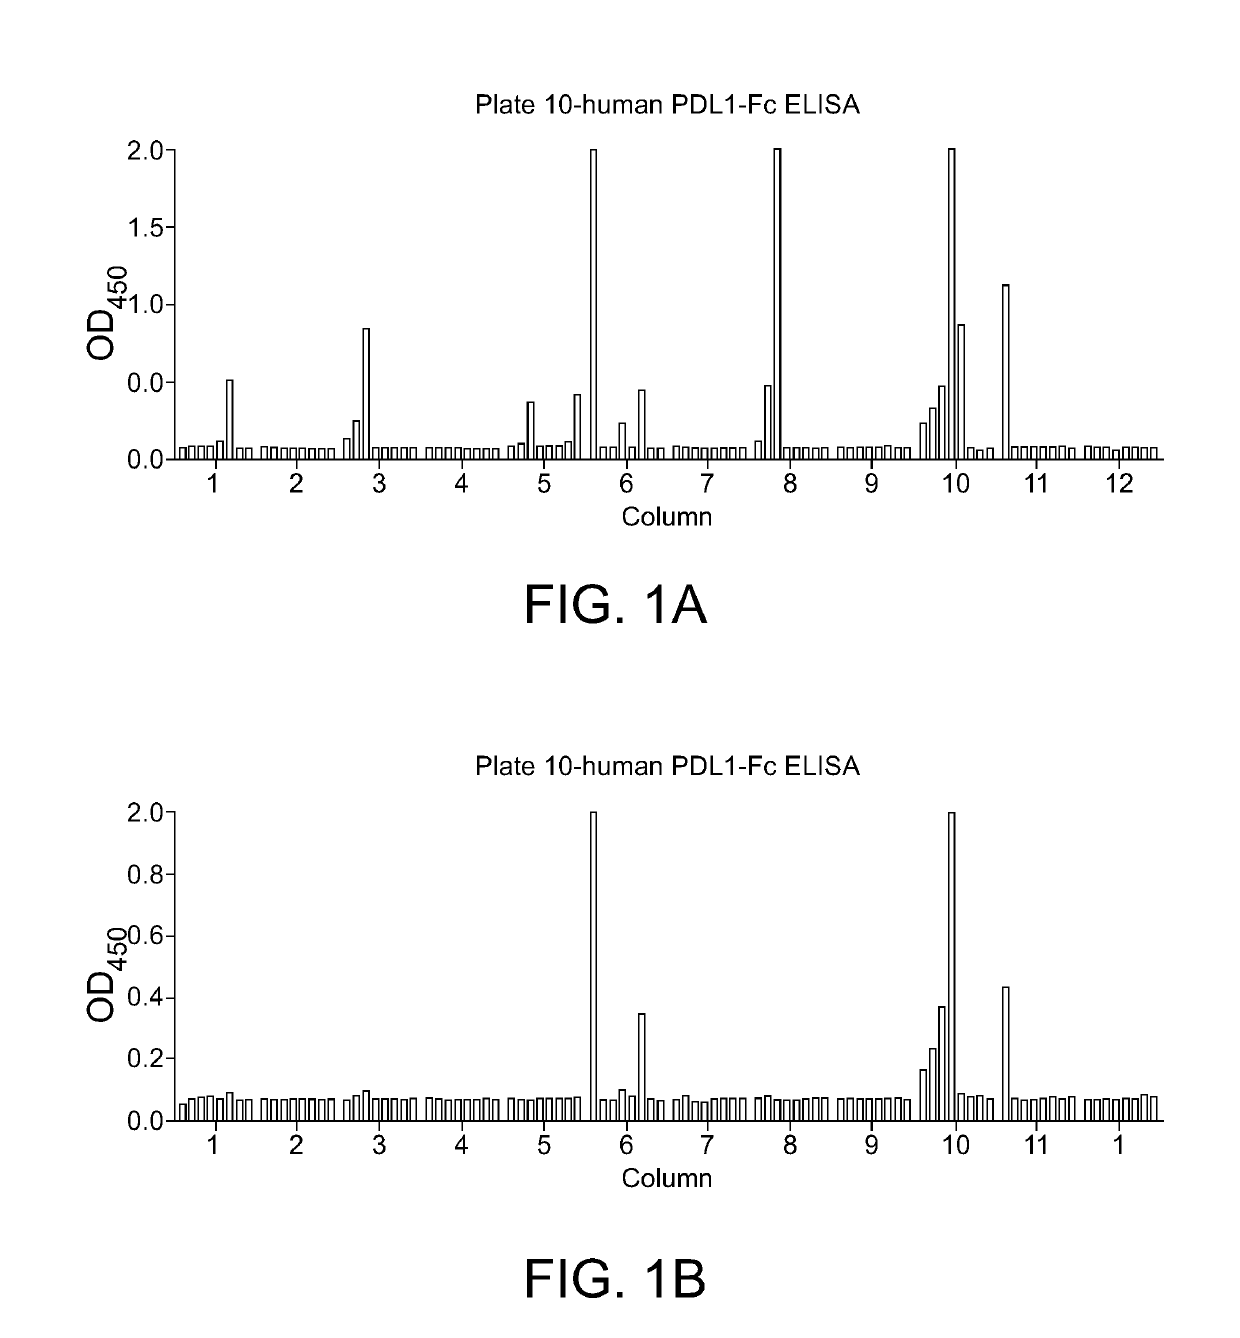 PD-L1 Specific Monoclonal Antibodies for Disease Treatment and Diagnosis